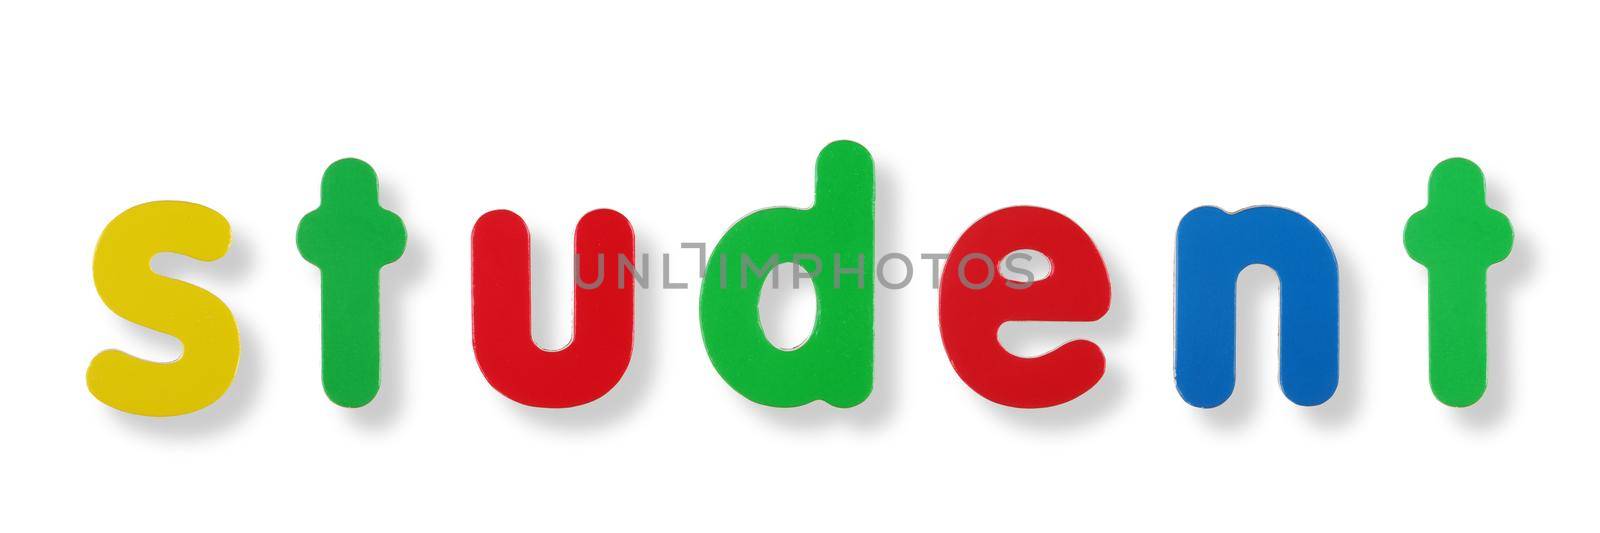 Student coloured magnetic letters on white with clipping path by VivacityImages